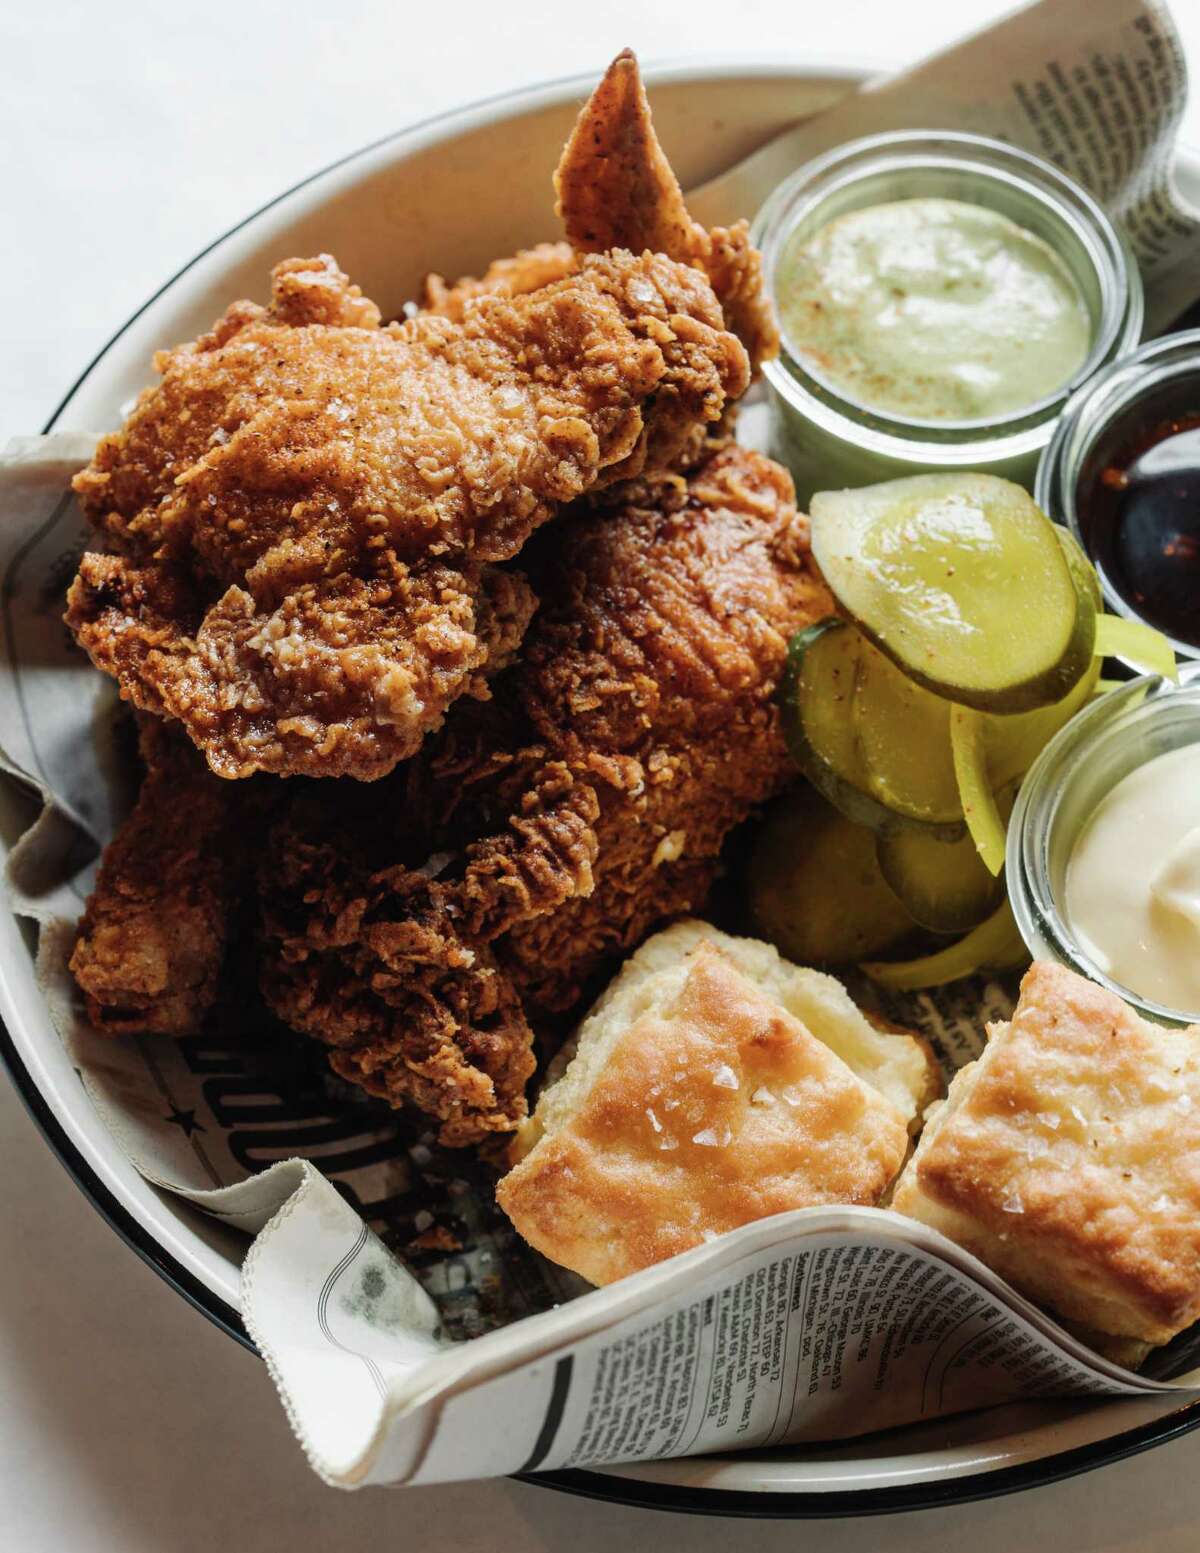 Restaurateur Ford Fry is reopening both La Lucha and Superica in the Heights for pick-up orders on April 13 after temporarily closing both restaurants for 14 days. Shown: La Lucha fried chicken.